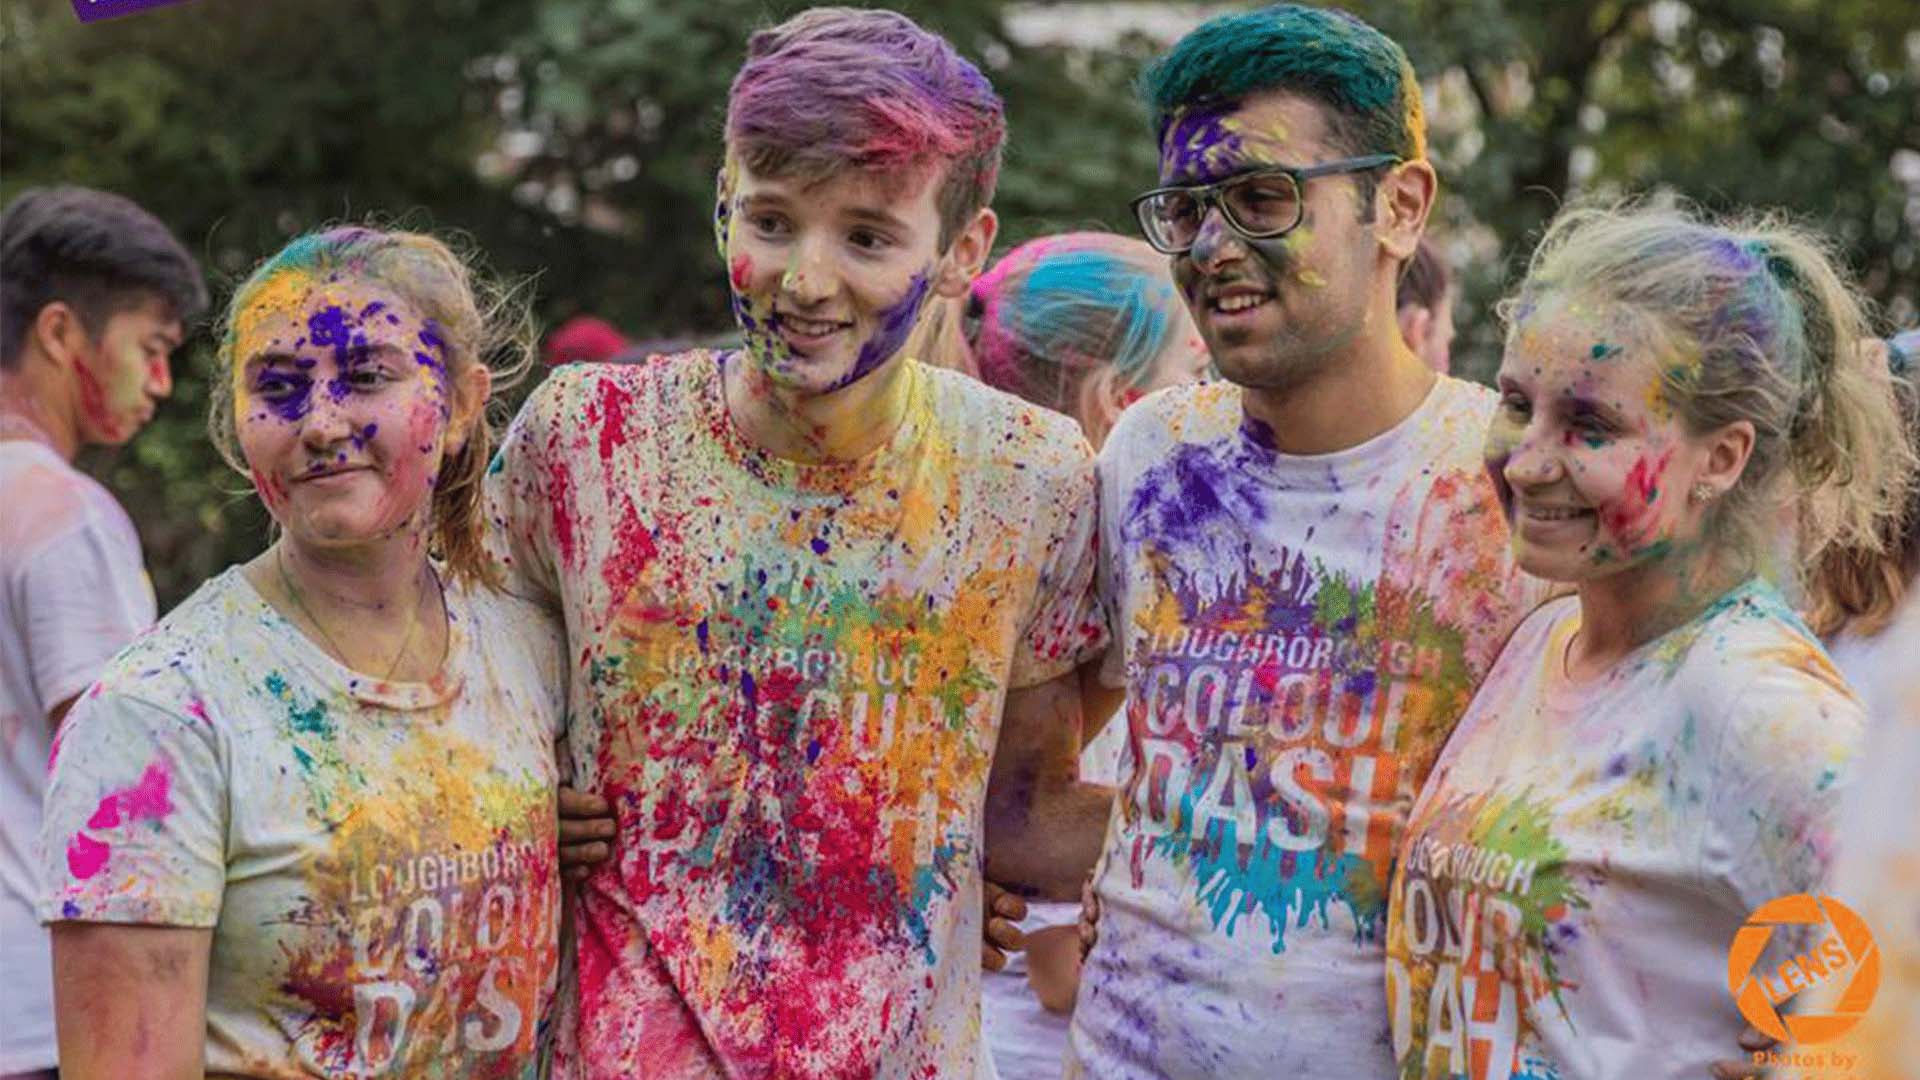 Hannah and her three friends at the Loughborough University Colour Dash covered in paint. 